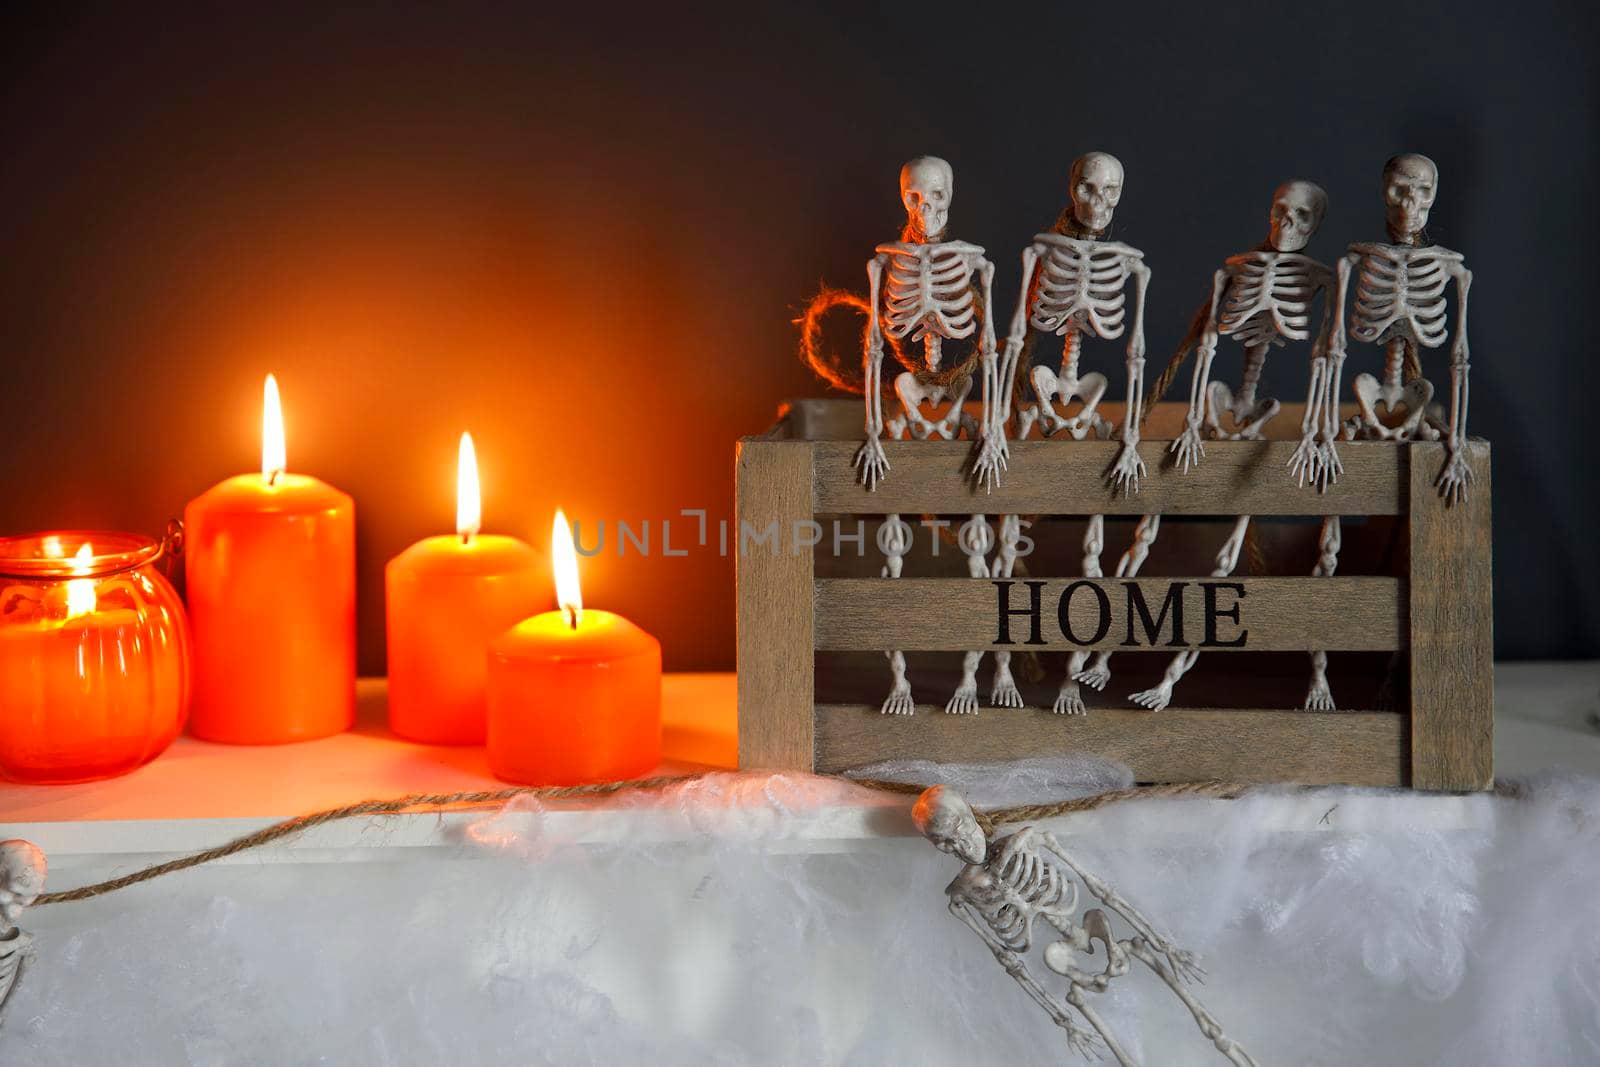 Halloween home decoration. Plastic toy skeletons in wooden box on fireplace against a dark blue wall. A garland of skeletons. Cobweb on the dresser. Orange candles and lantern.